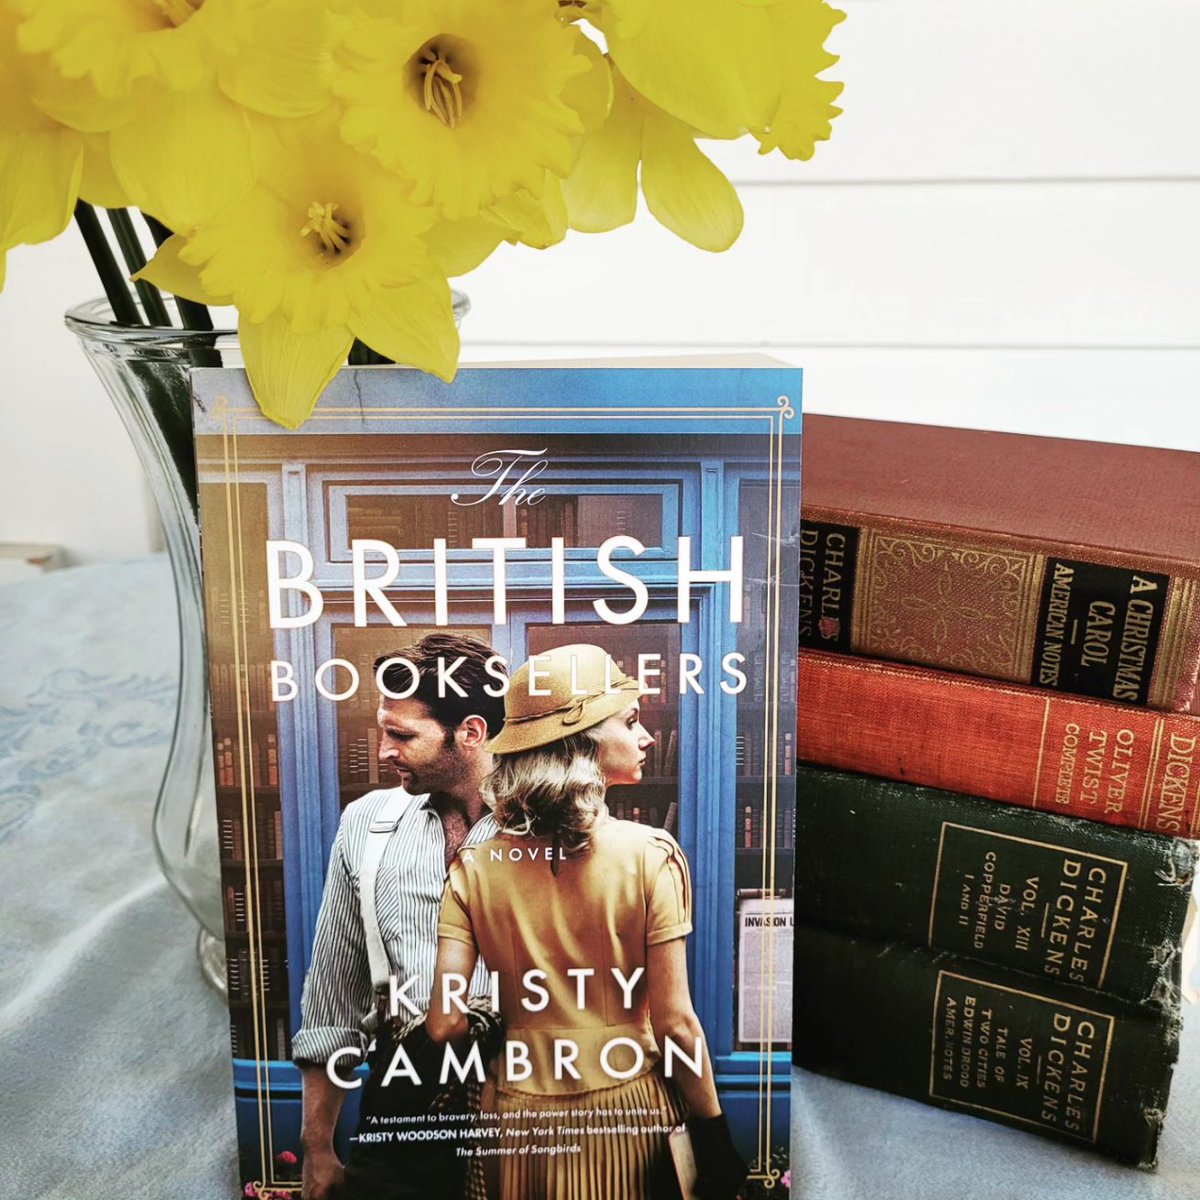 The British Booksellers by Kristy Cambron is a compelling historical fiction novel with engaging characters and a great dual timeline plot.  I highly recommend it.  @KCambronAuthor @ThomasNelson @Austenprose #thebritishbooksellers #kristycambron #historicalfiction #bookx